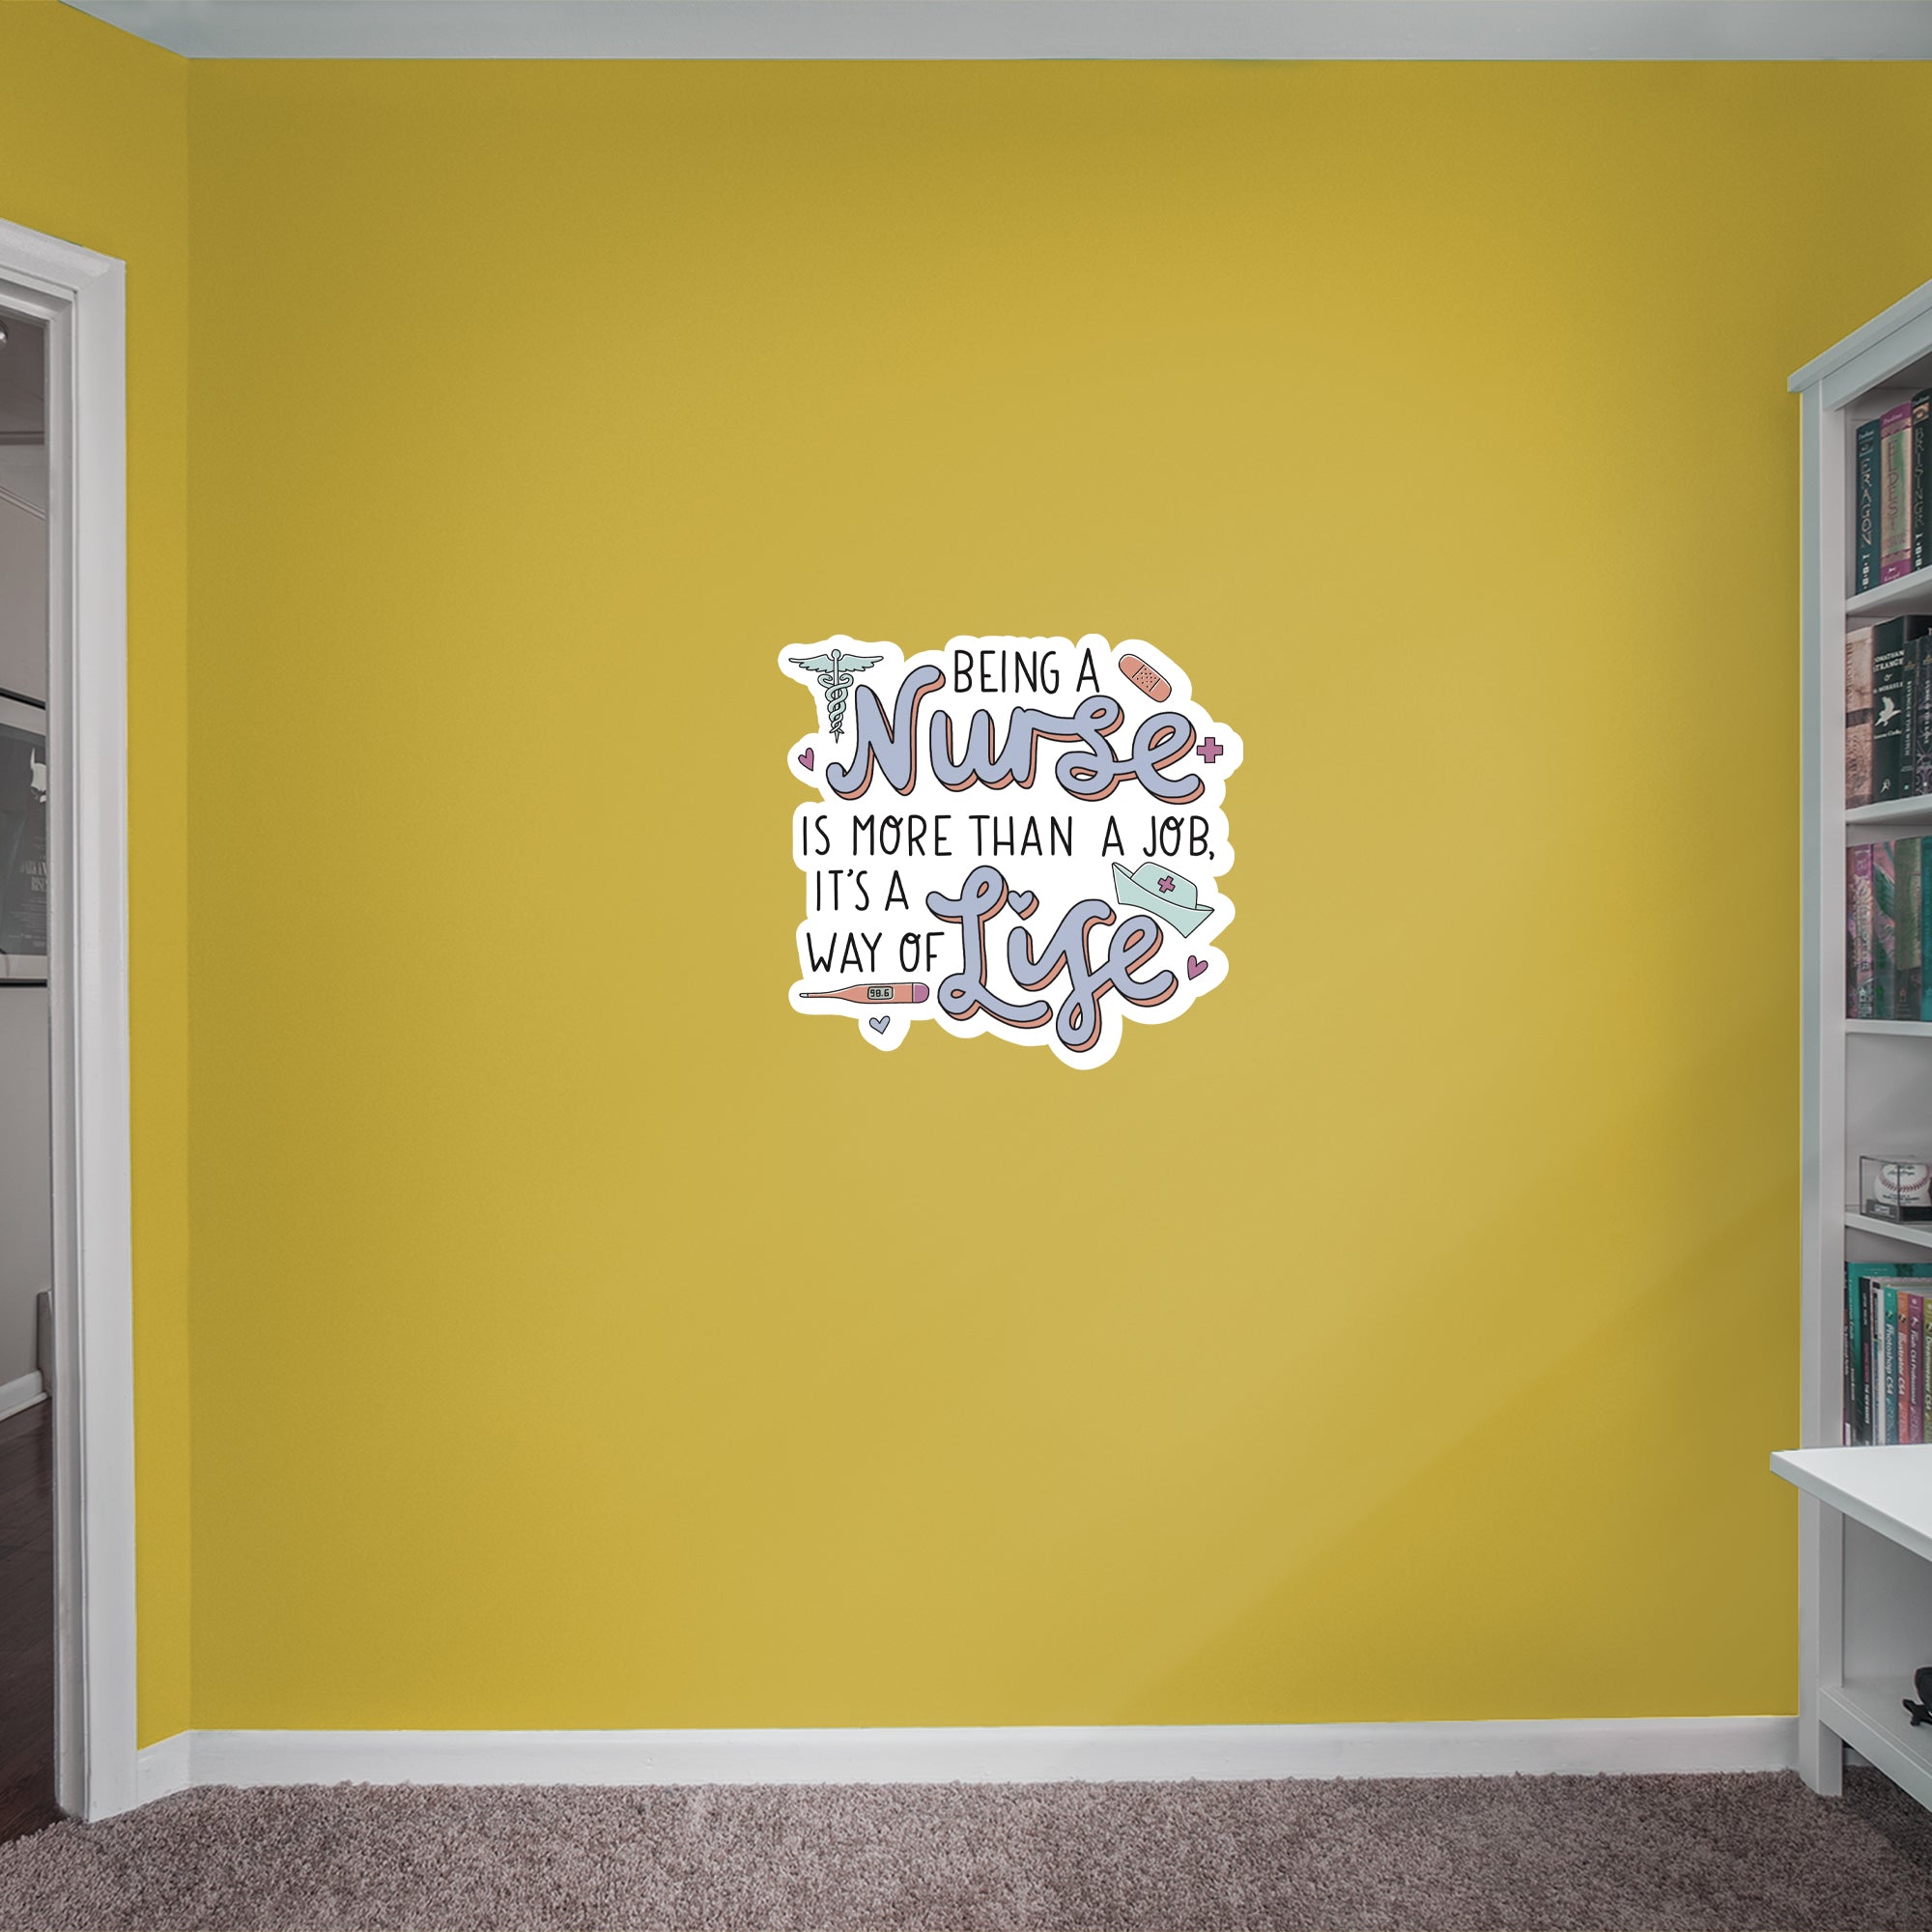 Being A Nurse Way Of Life - Officially Licensed Big Moods Removable Wall Decal XL by Fathead | Vinyl